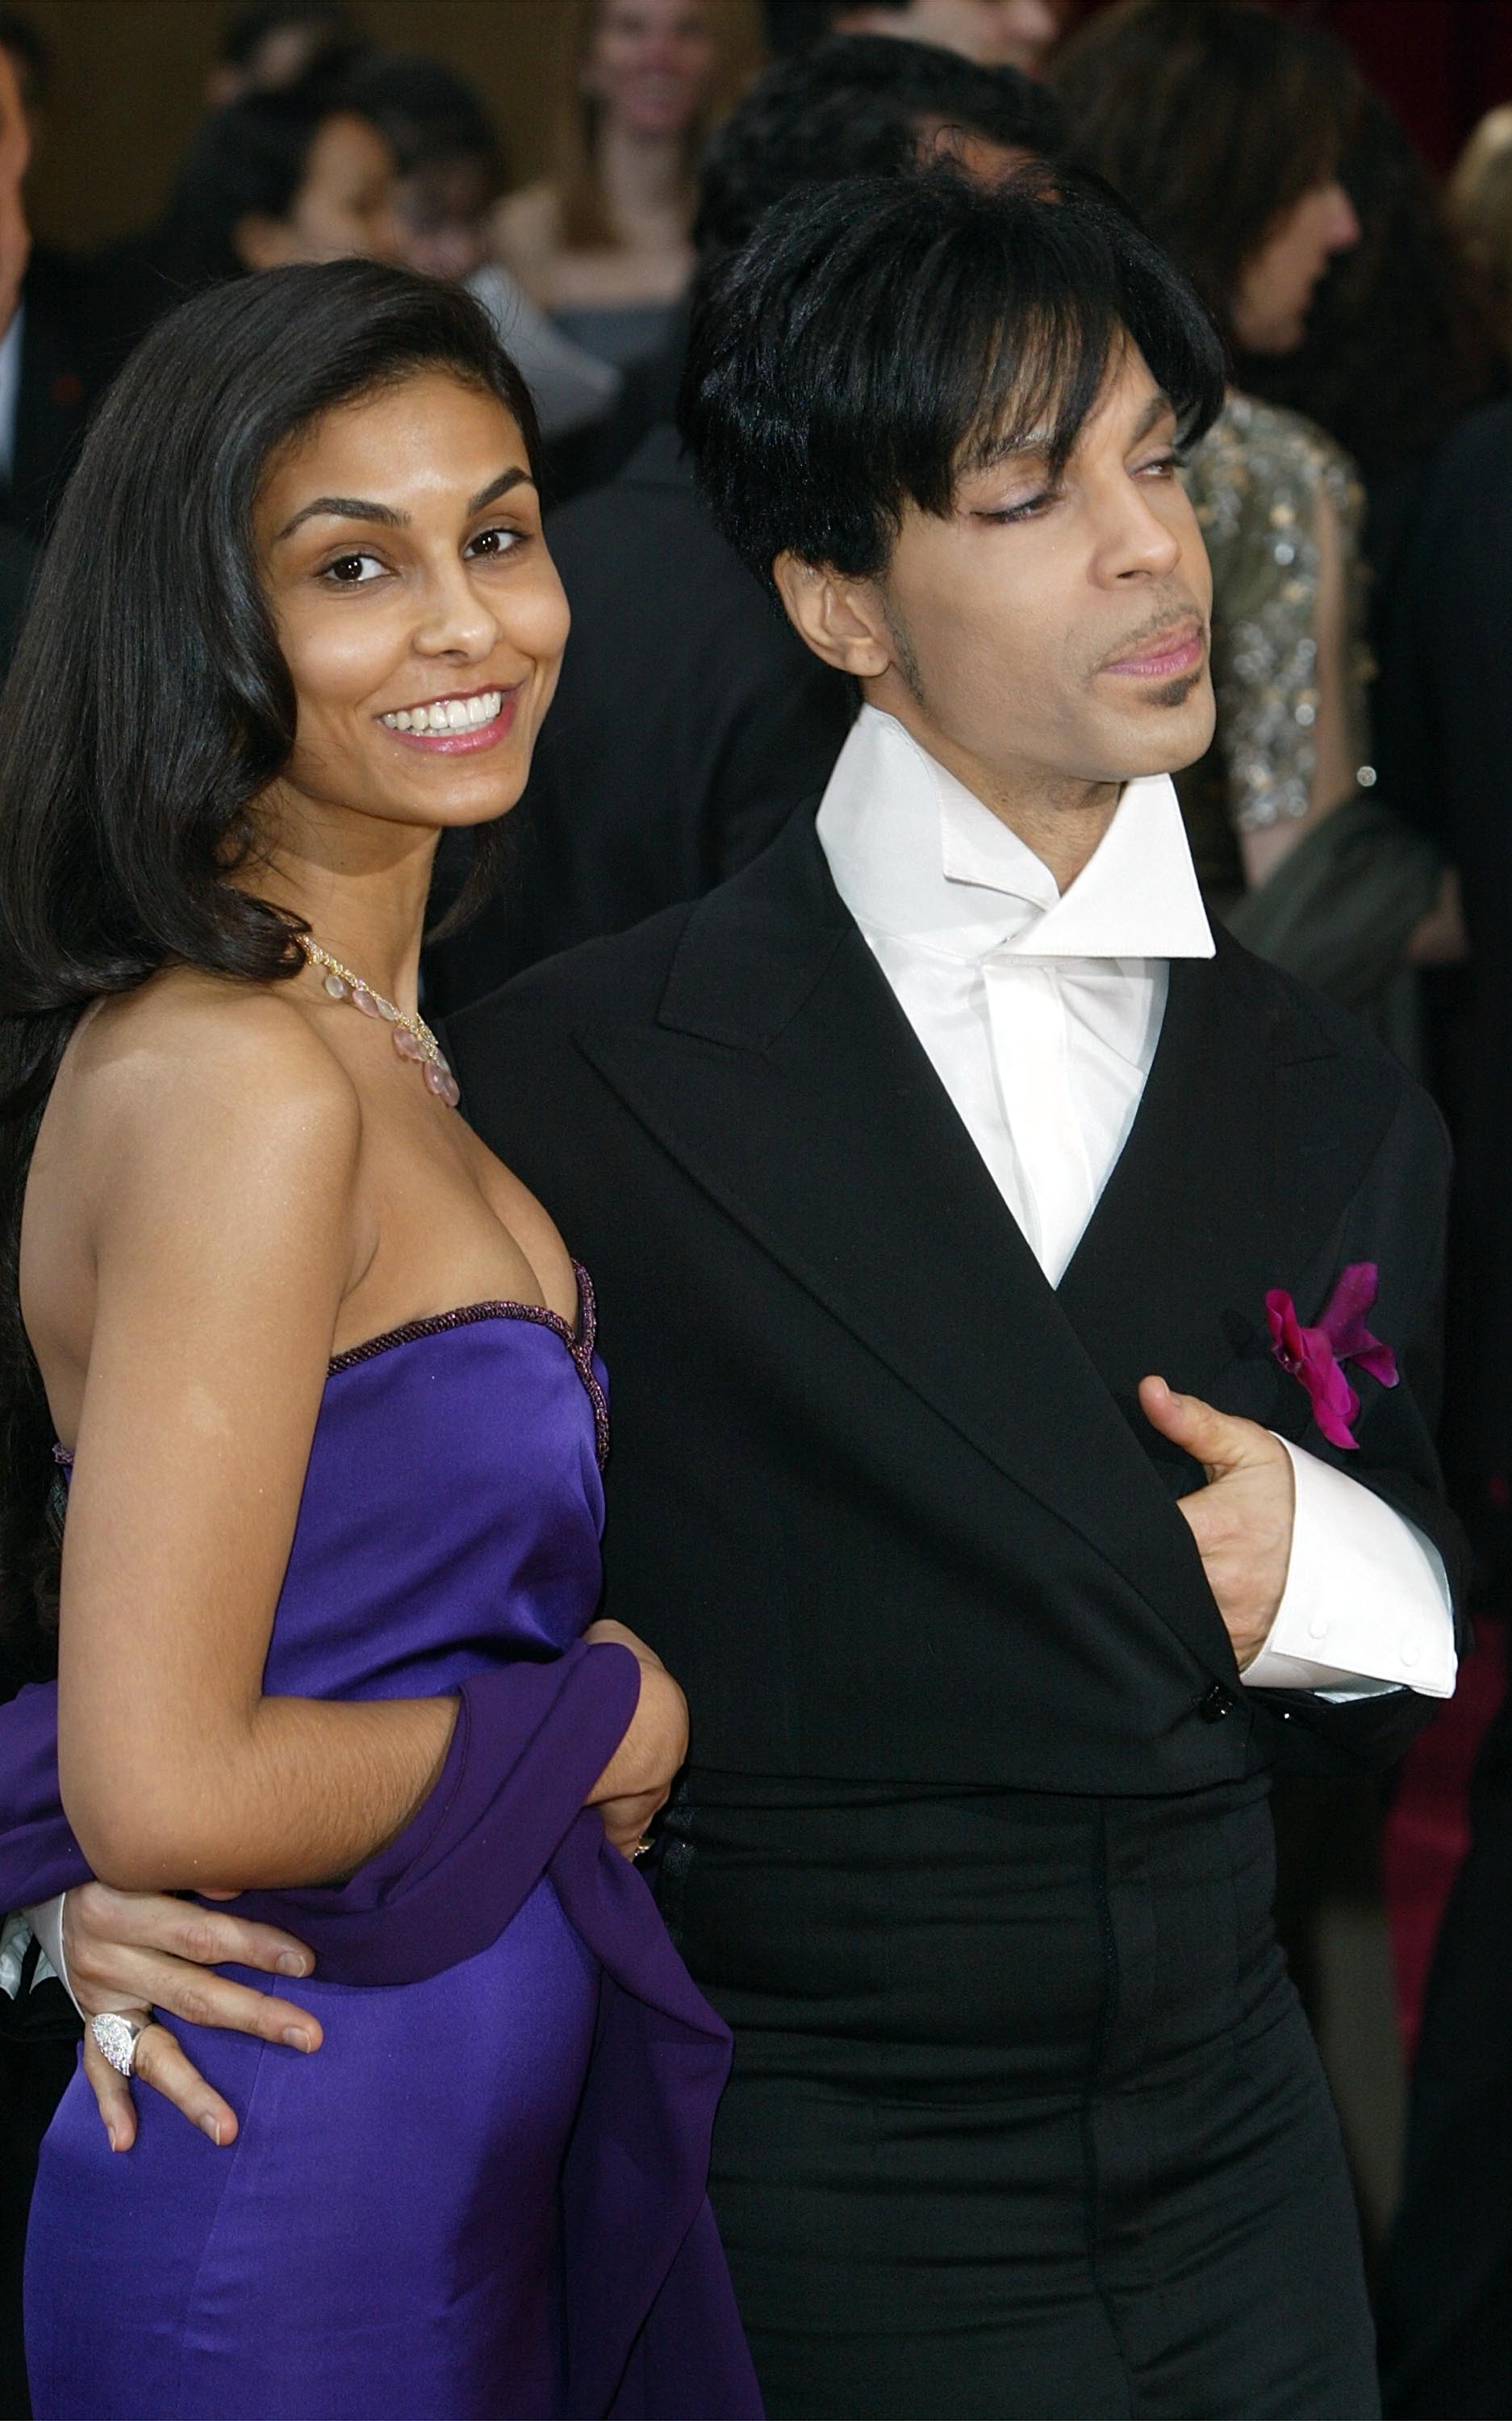 Prince arriving on the red carpet with his second wife, Manuela Testolini, at the 76th Annual Academy Awards